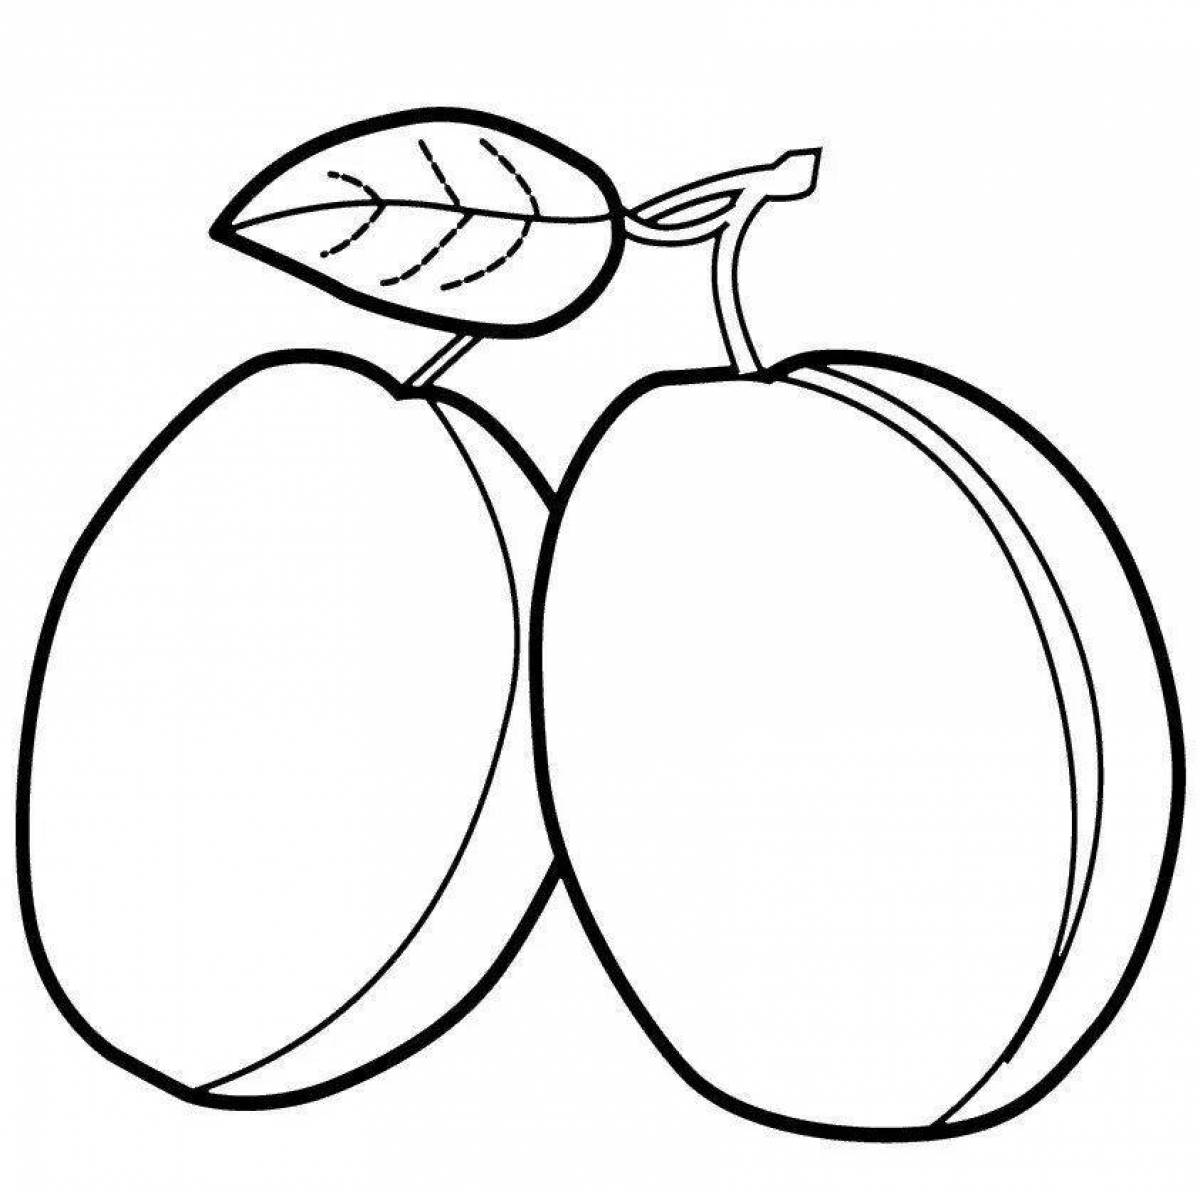 Fun coloring pages with fruits for kids